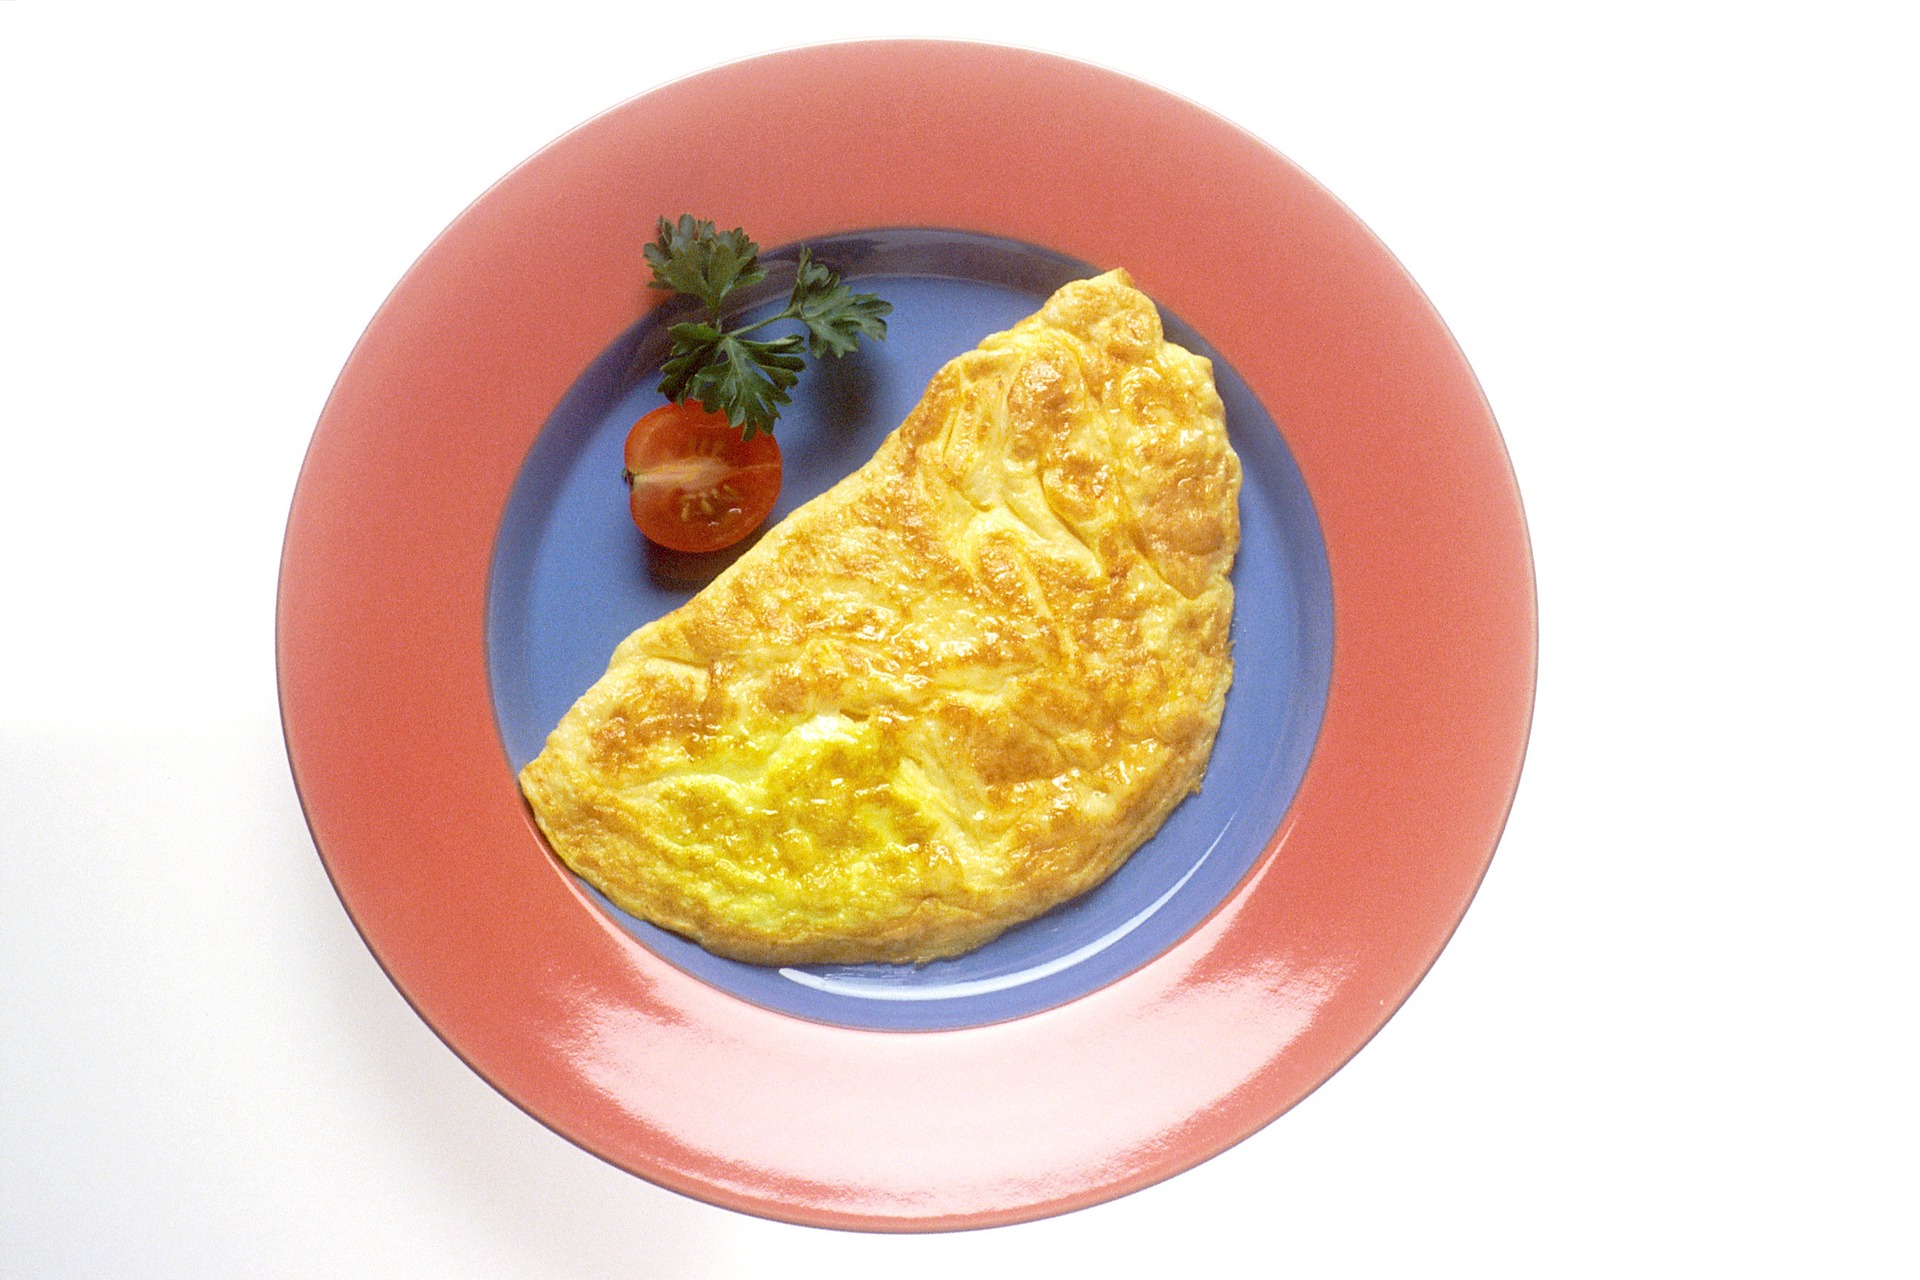 where does the word omelet come from and what does omelet mean in french